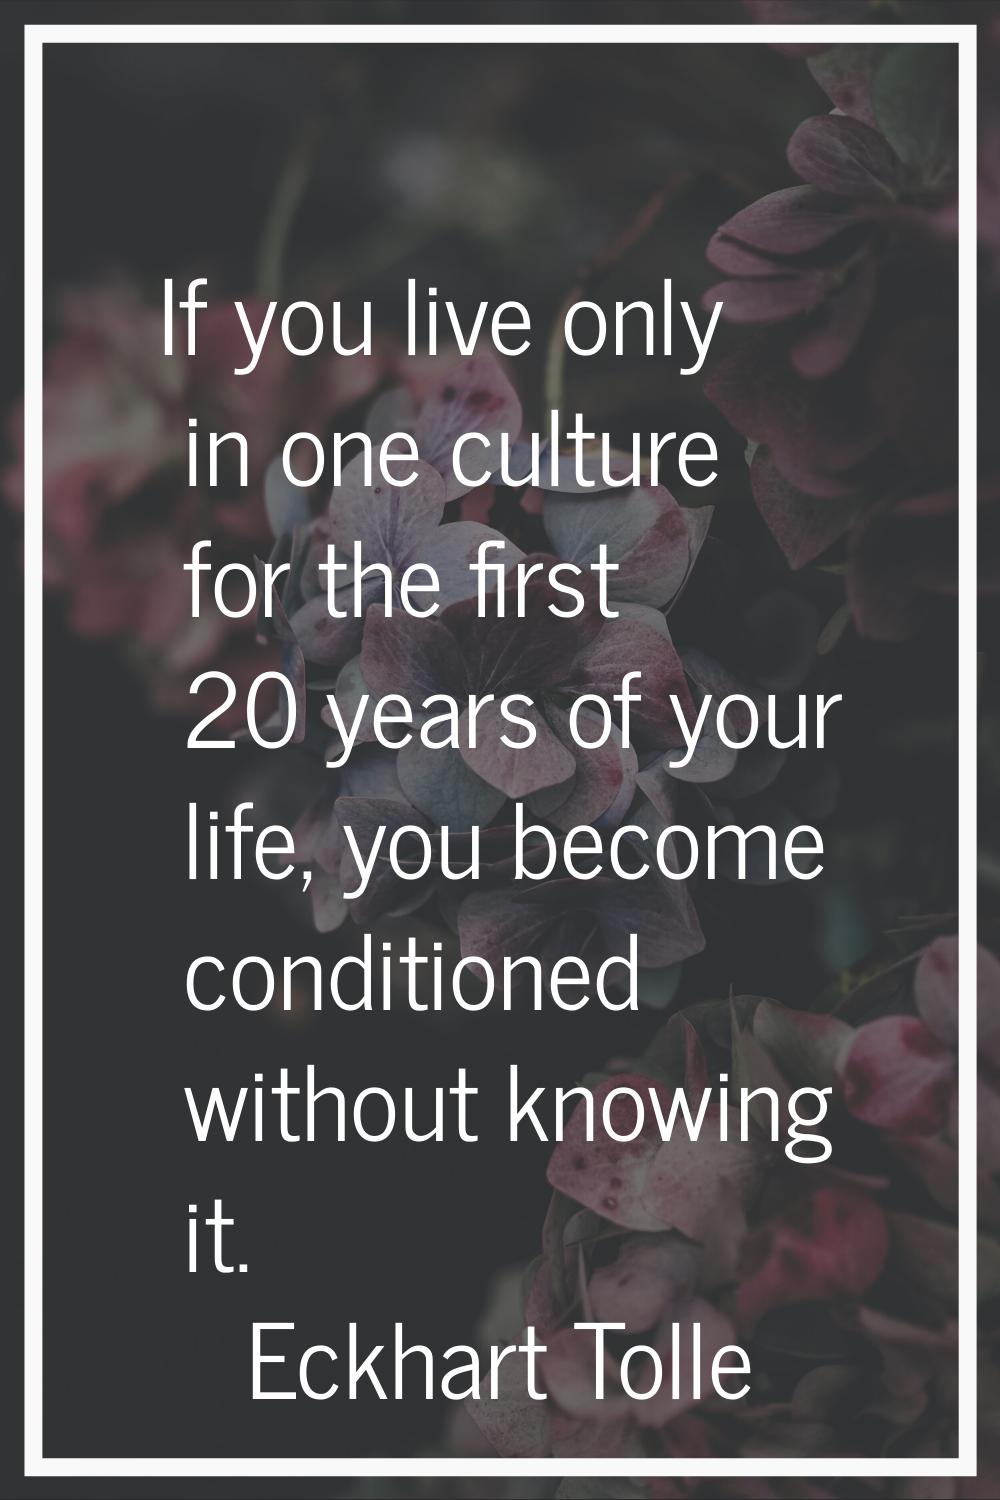 If you live only in one culture for the first 20 years of your life, you become conditioned without